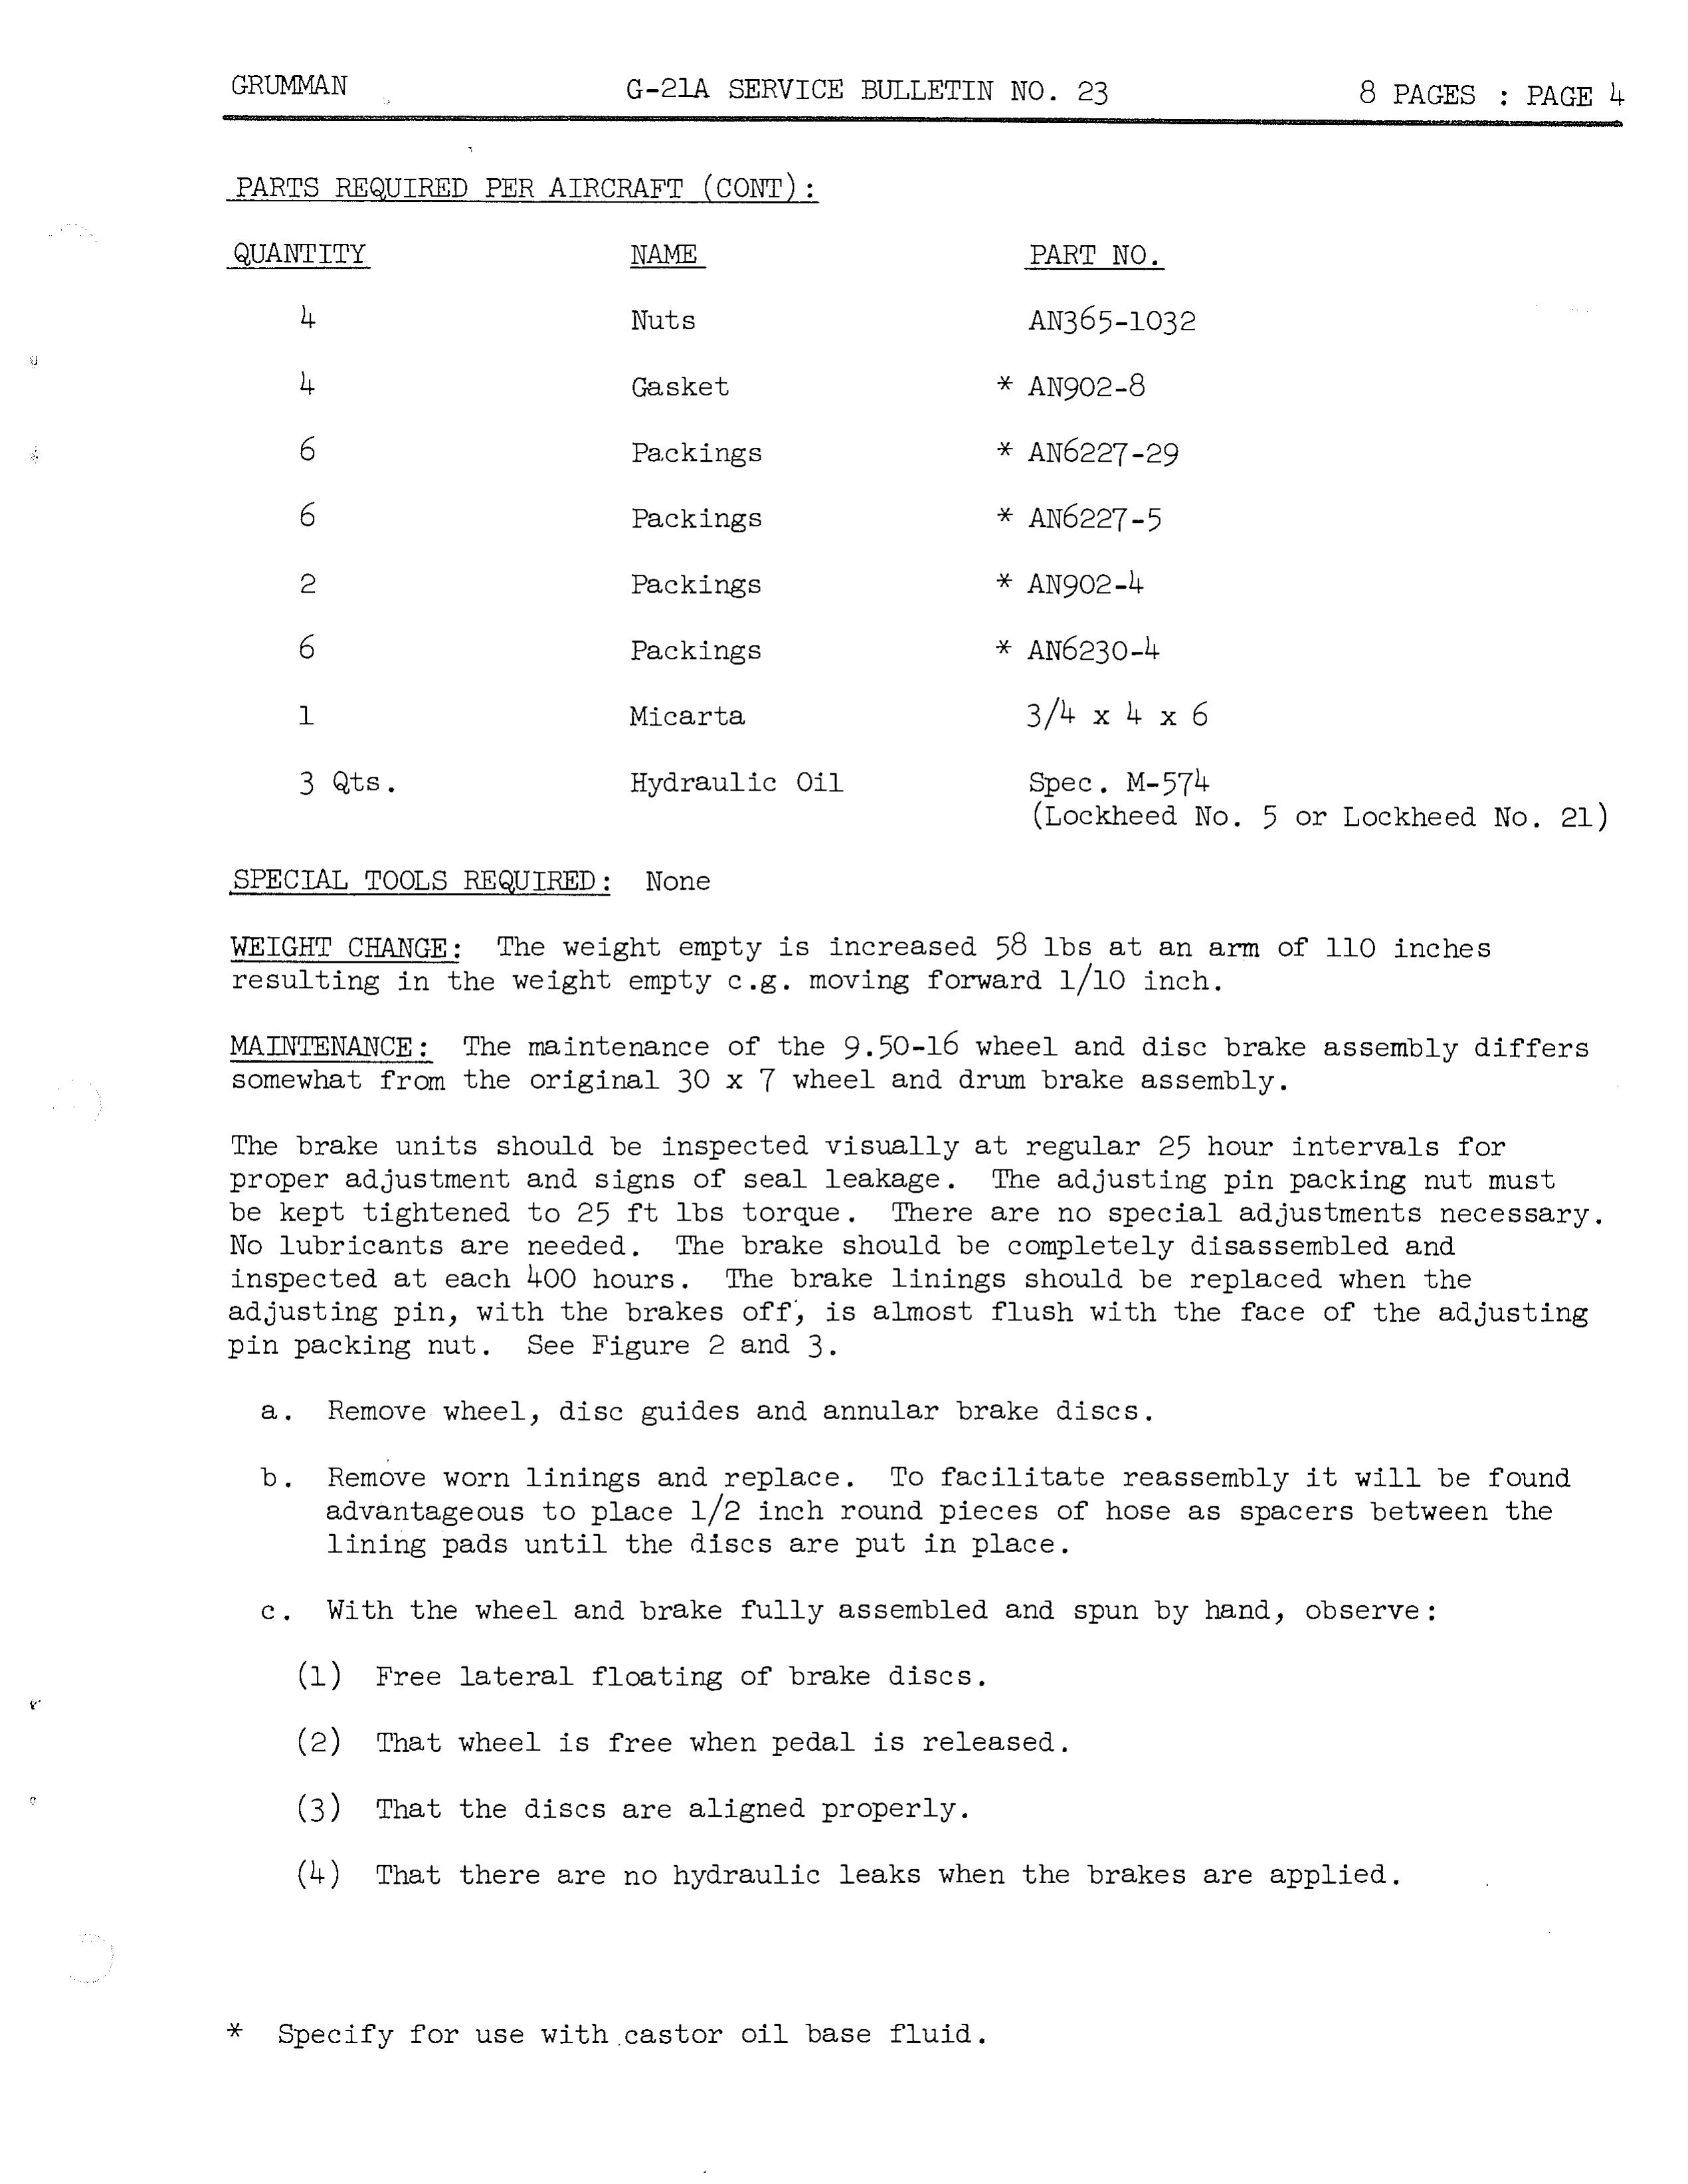 Sample page 5 from AirCorps Library document: Installation of Landing Gear and Brakes for G-21A